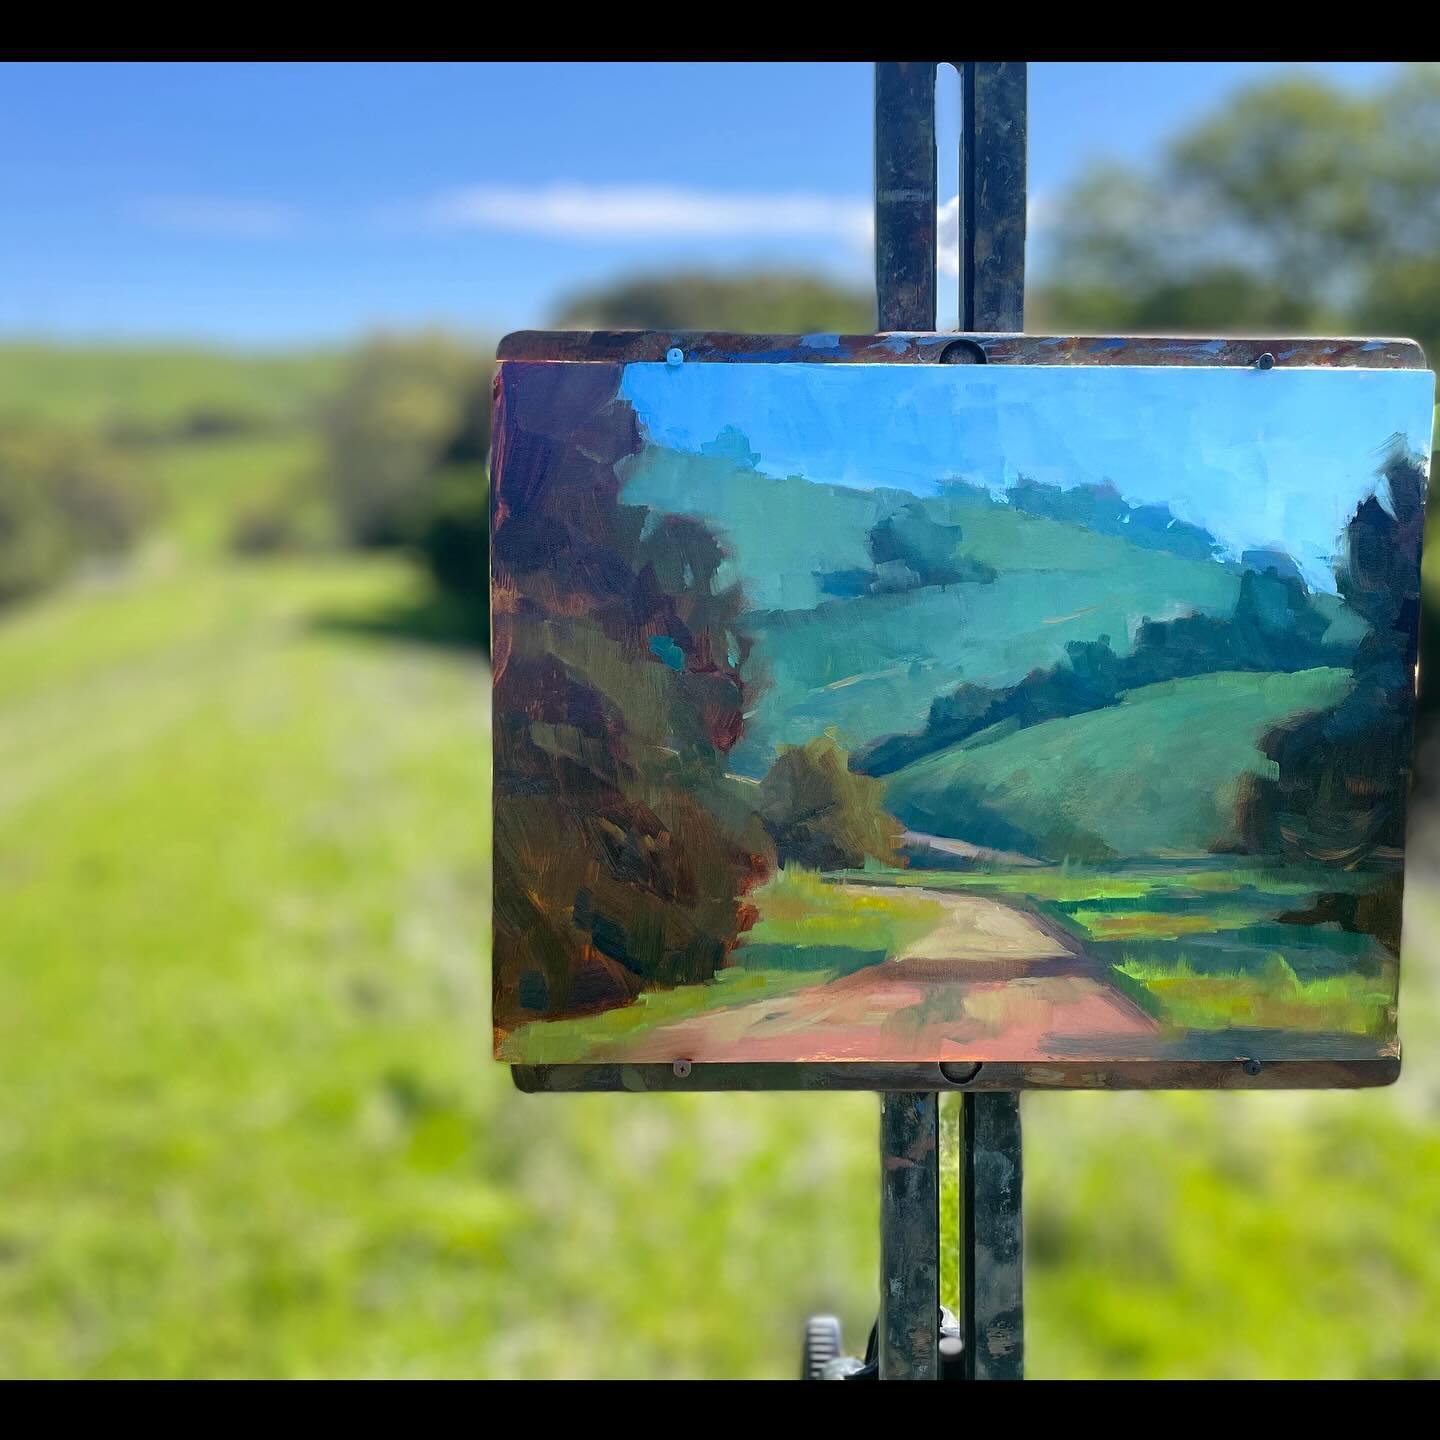 Out painting with the East Bay posse on a crystalline Sunday morning @jbensman @kristianmatthewsart @ericanoreliusfineart @timhornart 
.
.
 #landscapepainting #pleinair #pleinairpainting  #oilpainting #oilpaintings